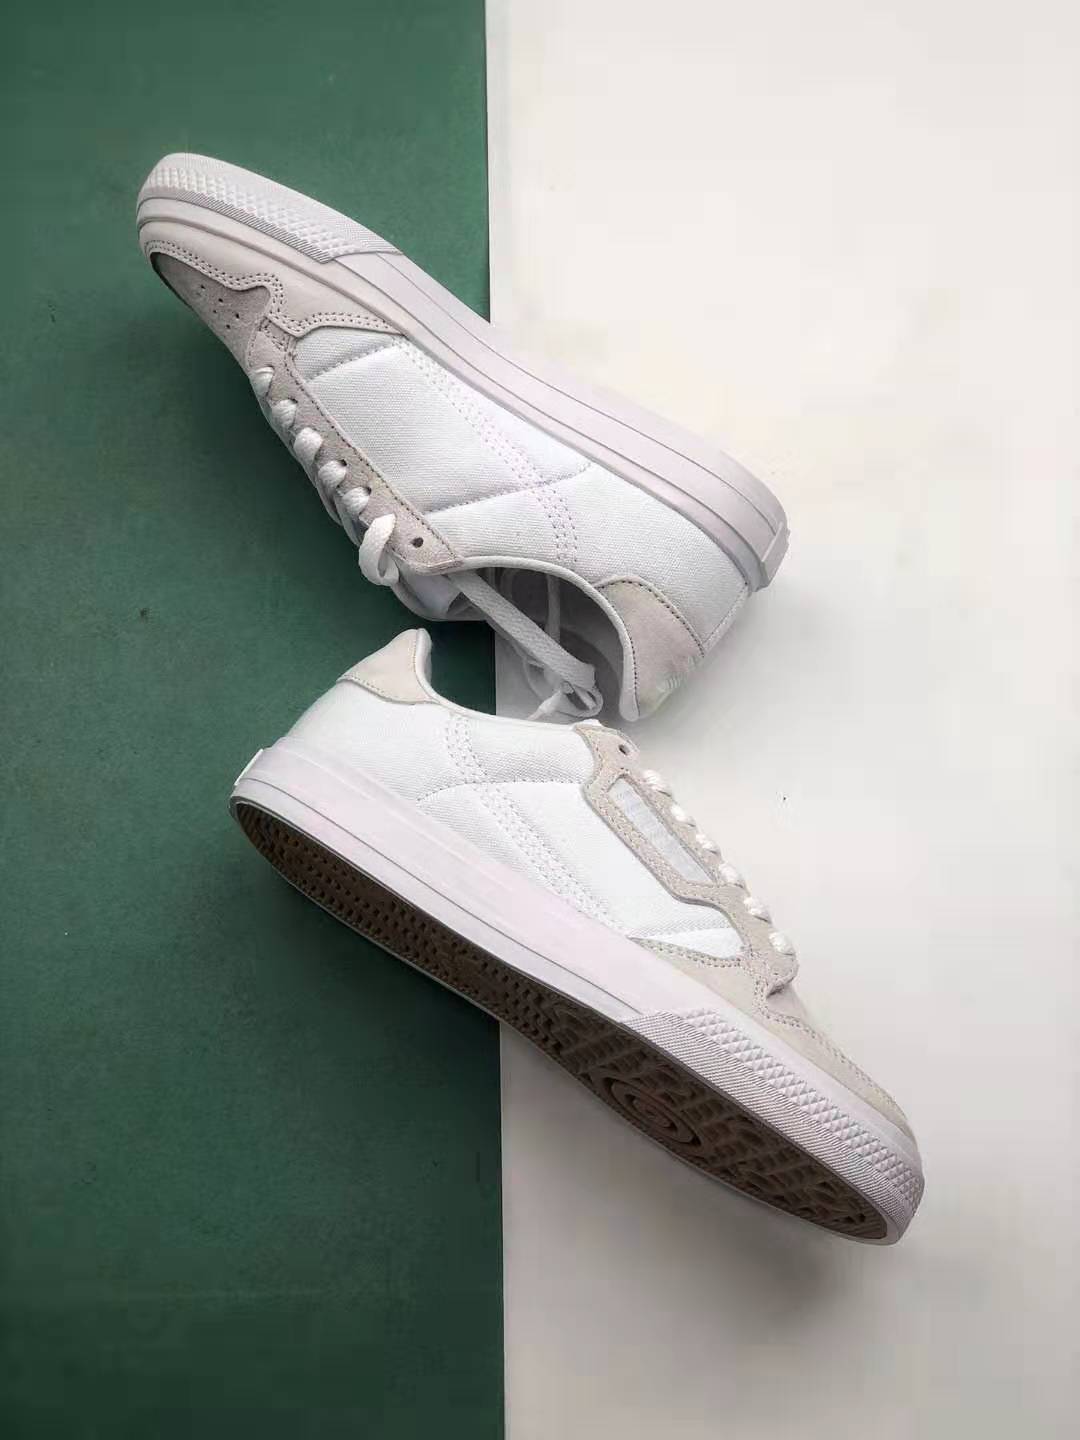 Adidas Continental Vulc Triple White EF3523 - Stylish and Versatile Sneakers